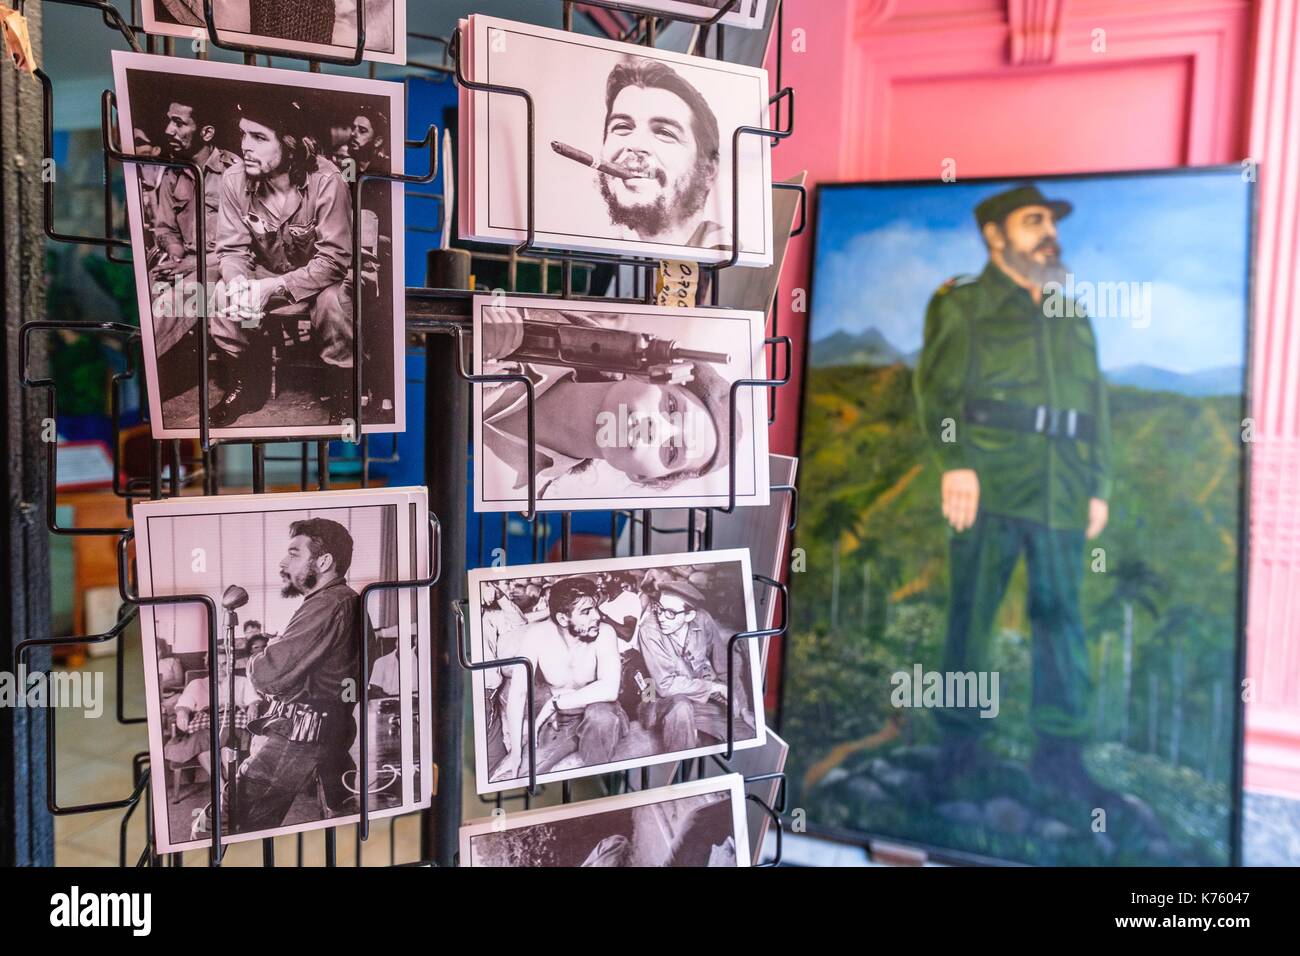 Cuba, Havana, Habana Vieja district (UNESCO World Heritage site), calle Obispo, pedestrian shopping street, painting and postcards with the effigy of Fidel Castro and Che Guevara Stock Photo